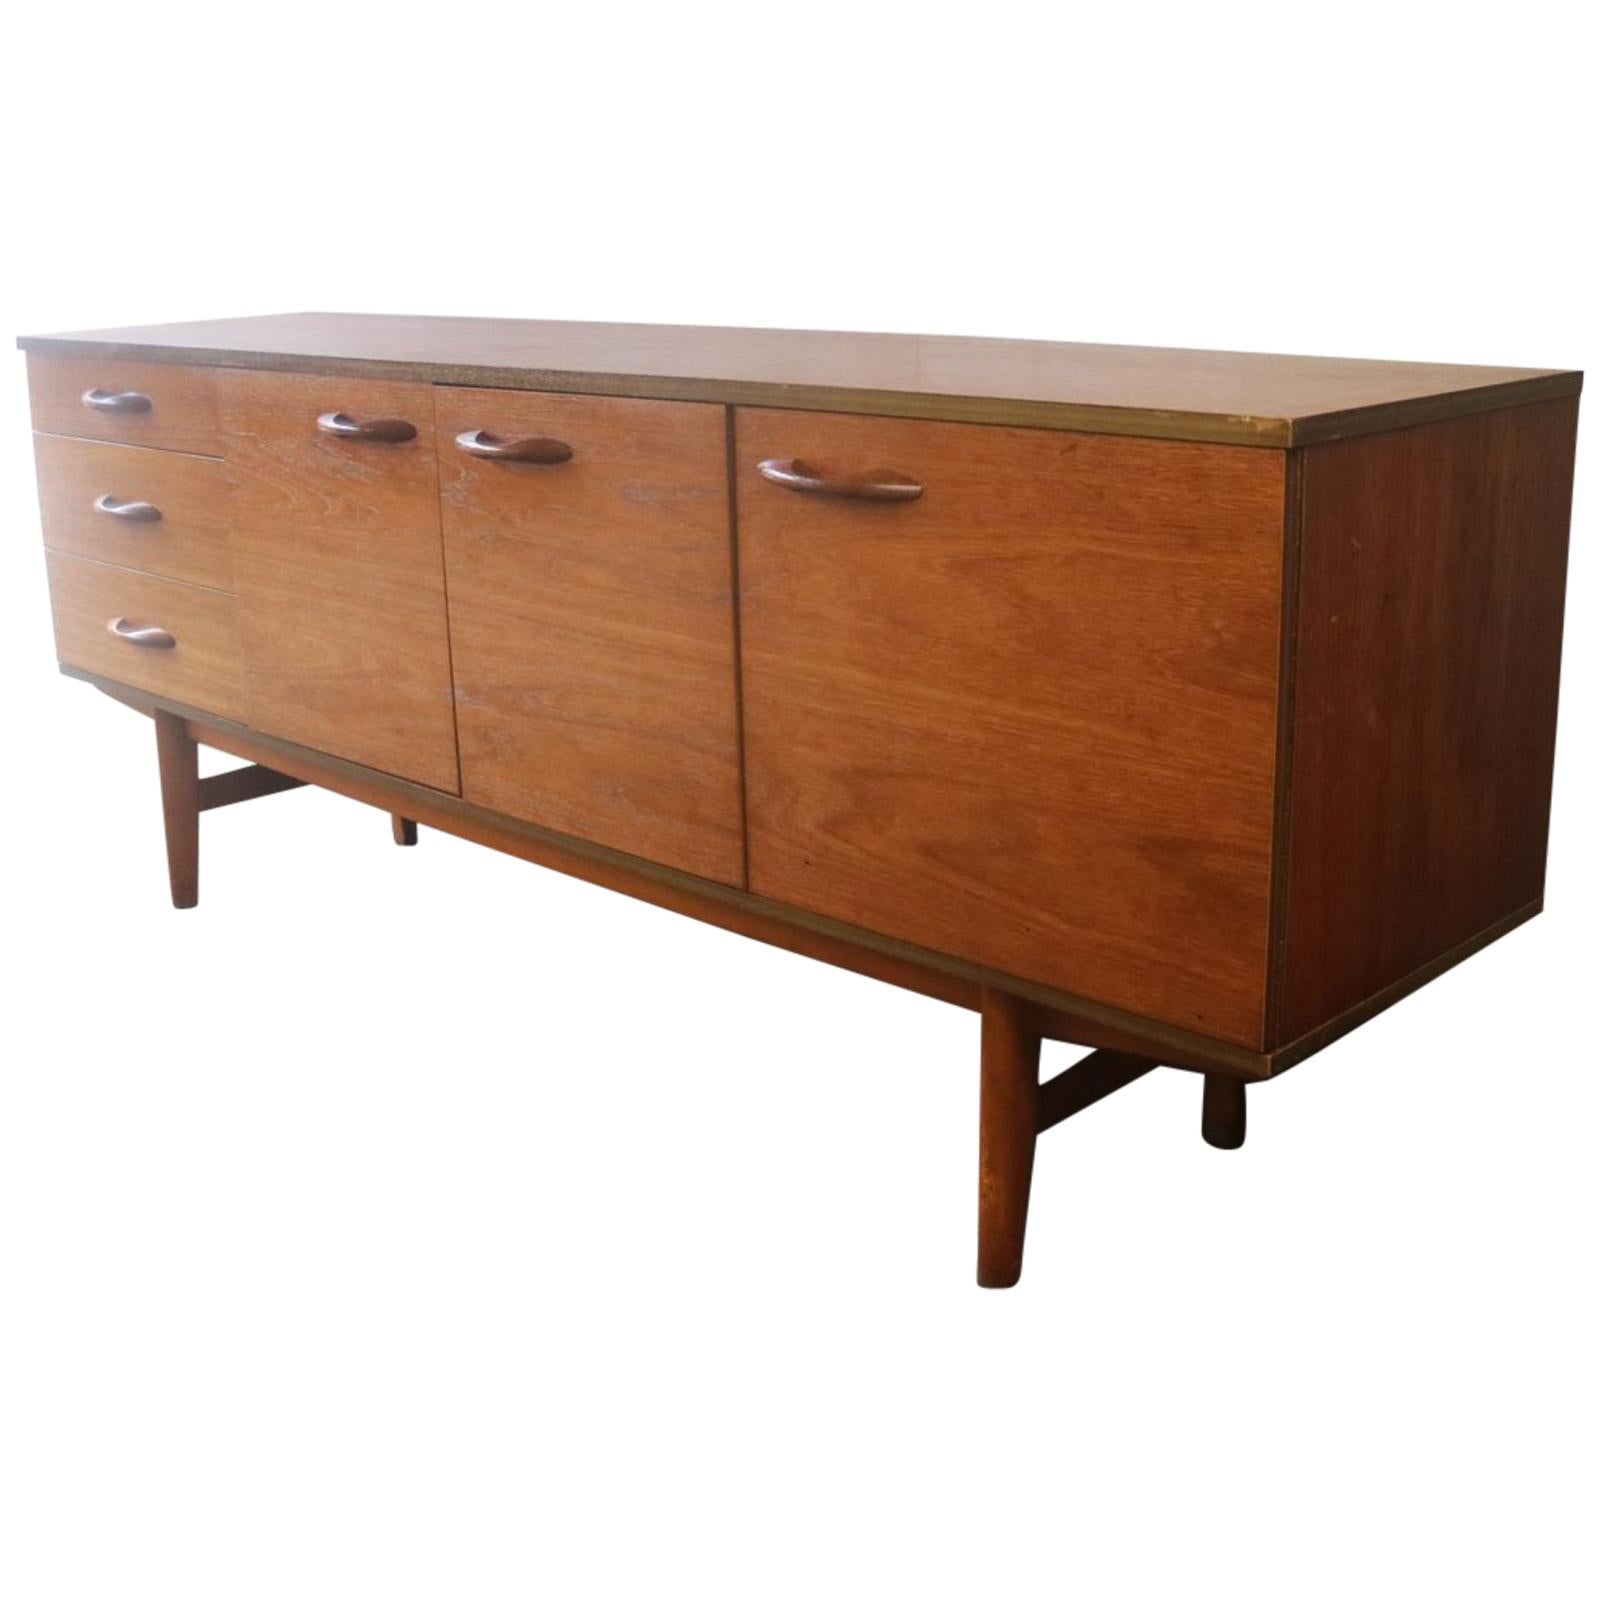 English Midcentury 1970s Sideboard by Avalon For Sale